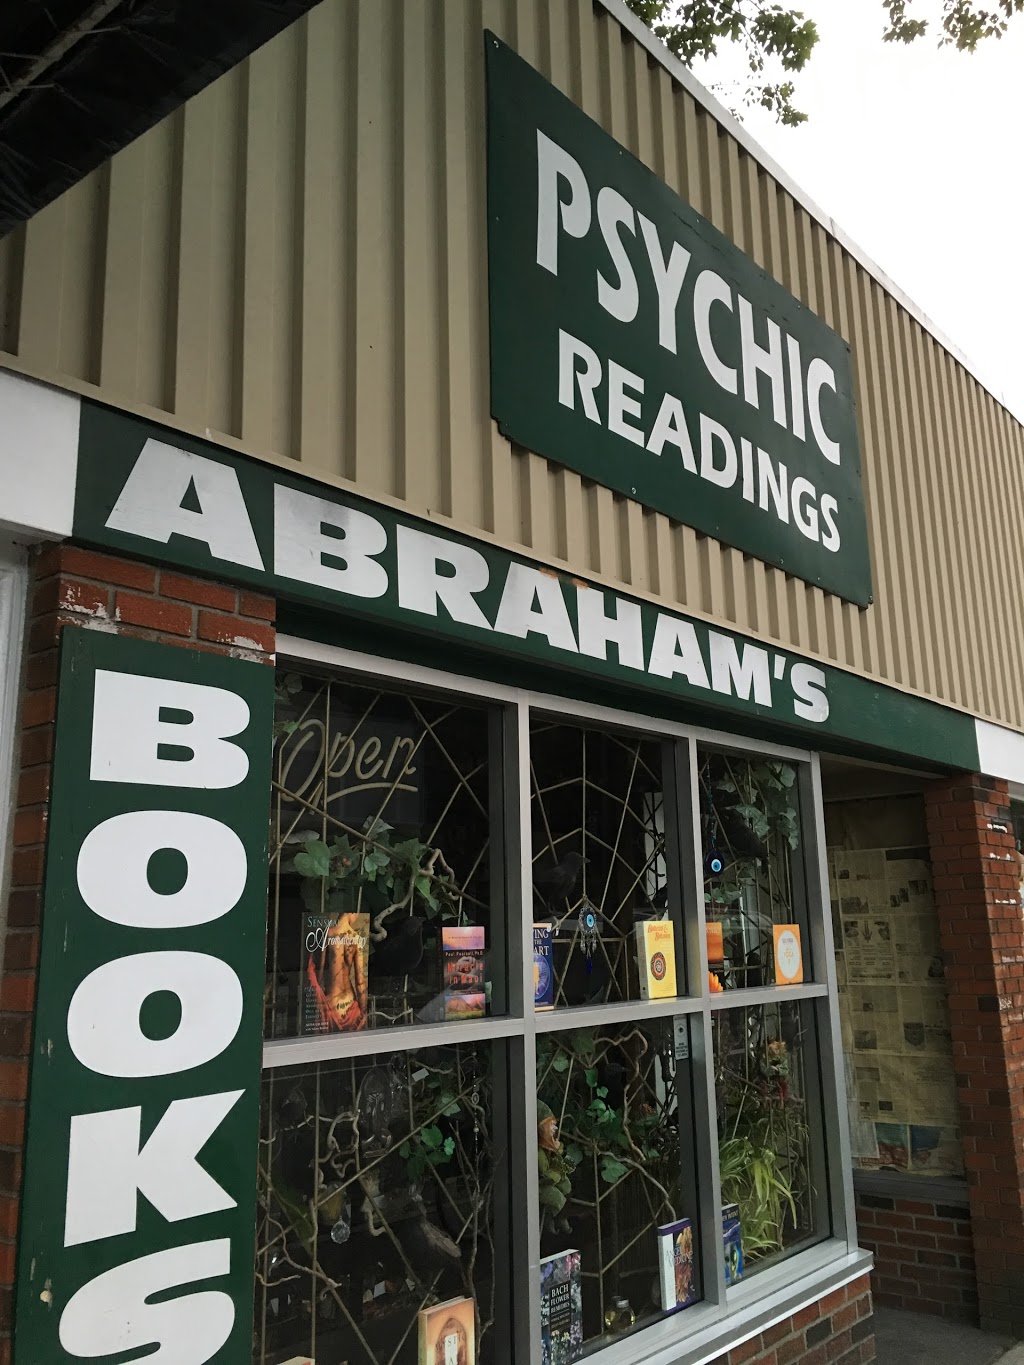 Abrahams Metaphysical Books | 2777 Commercial Dr, Vancouver, BC V5N 4C5, Canada | Phone: (604) 875-1958